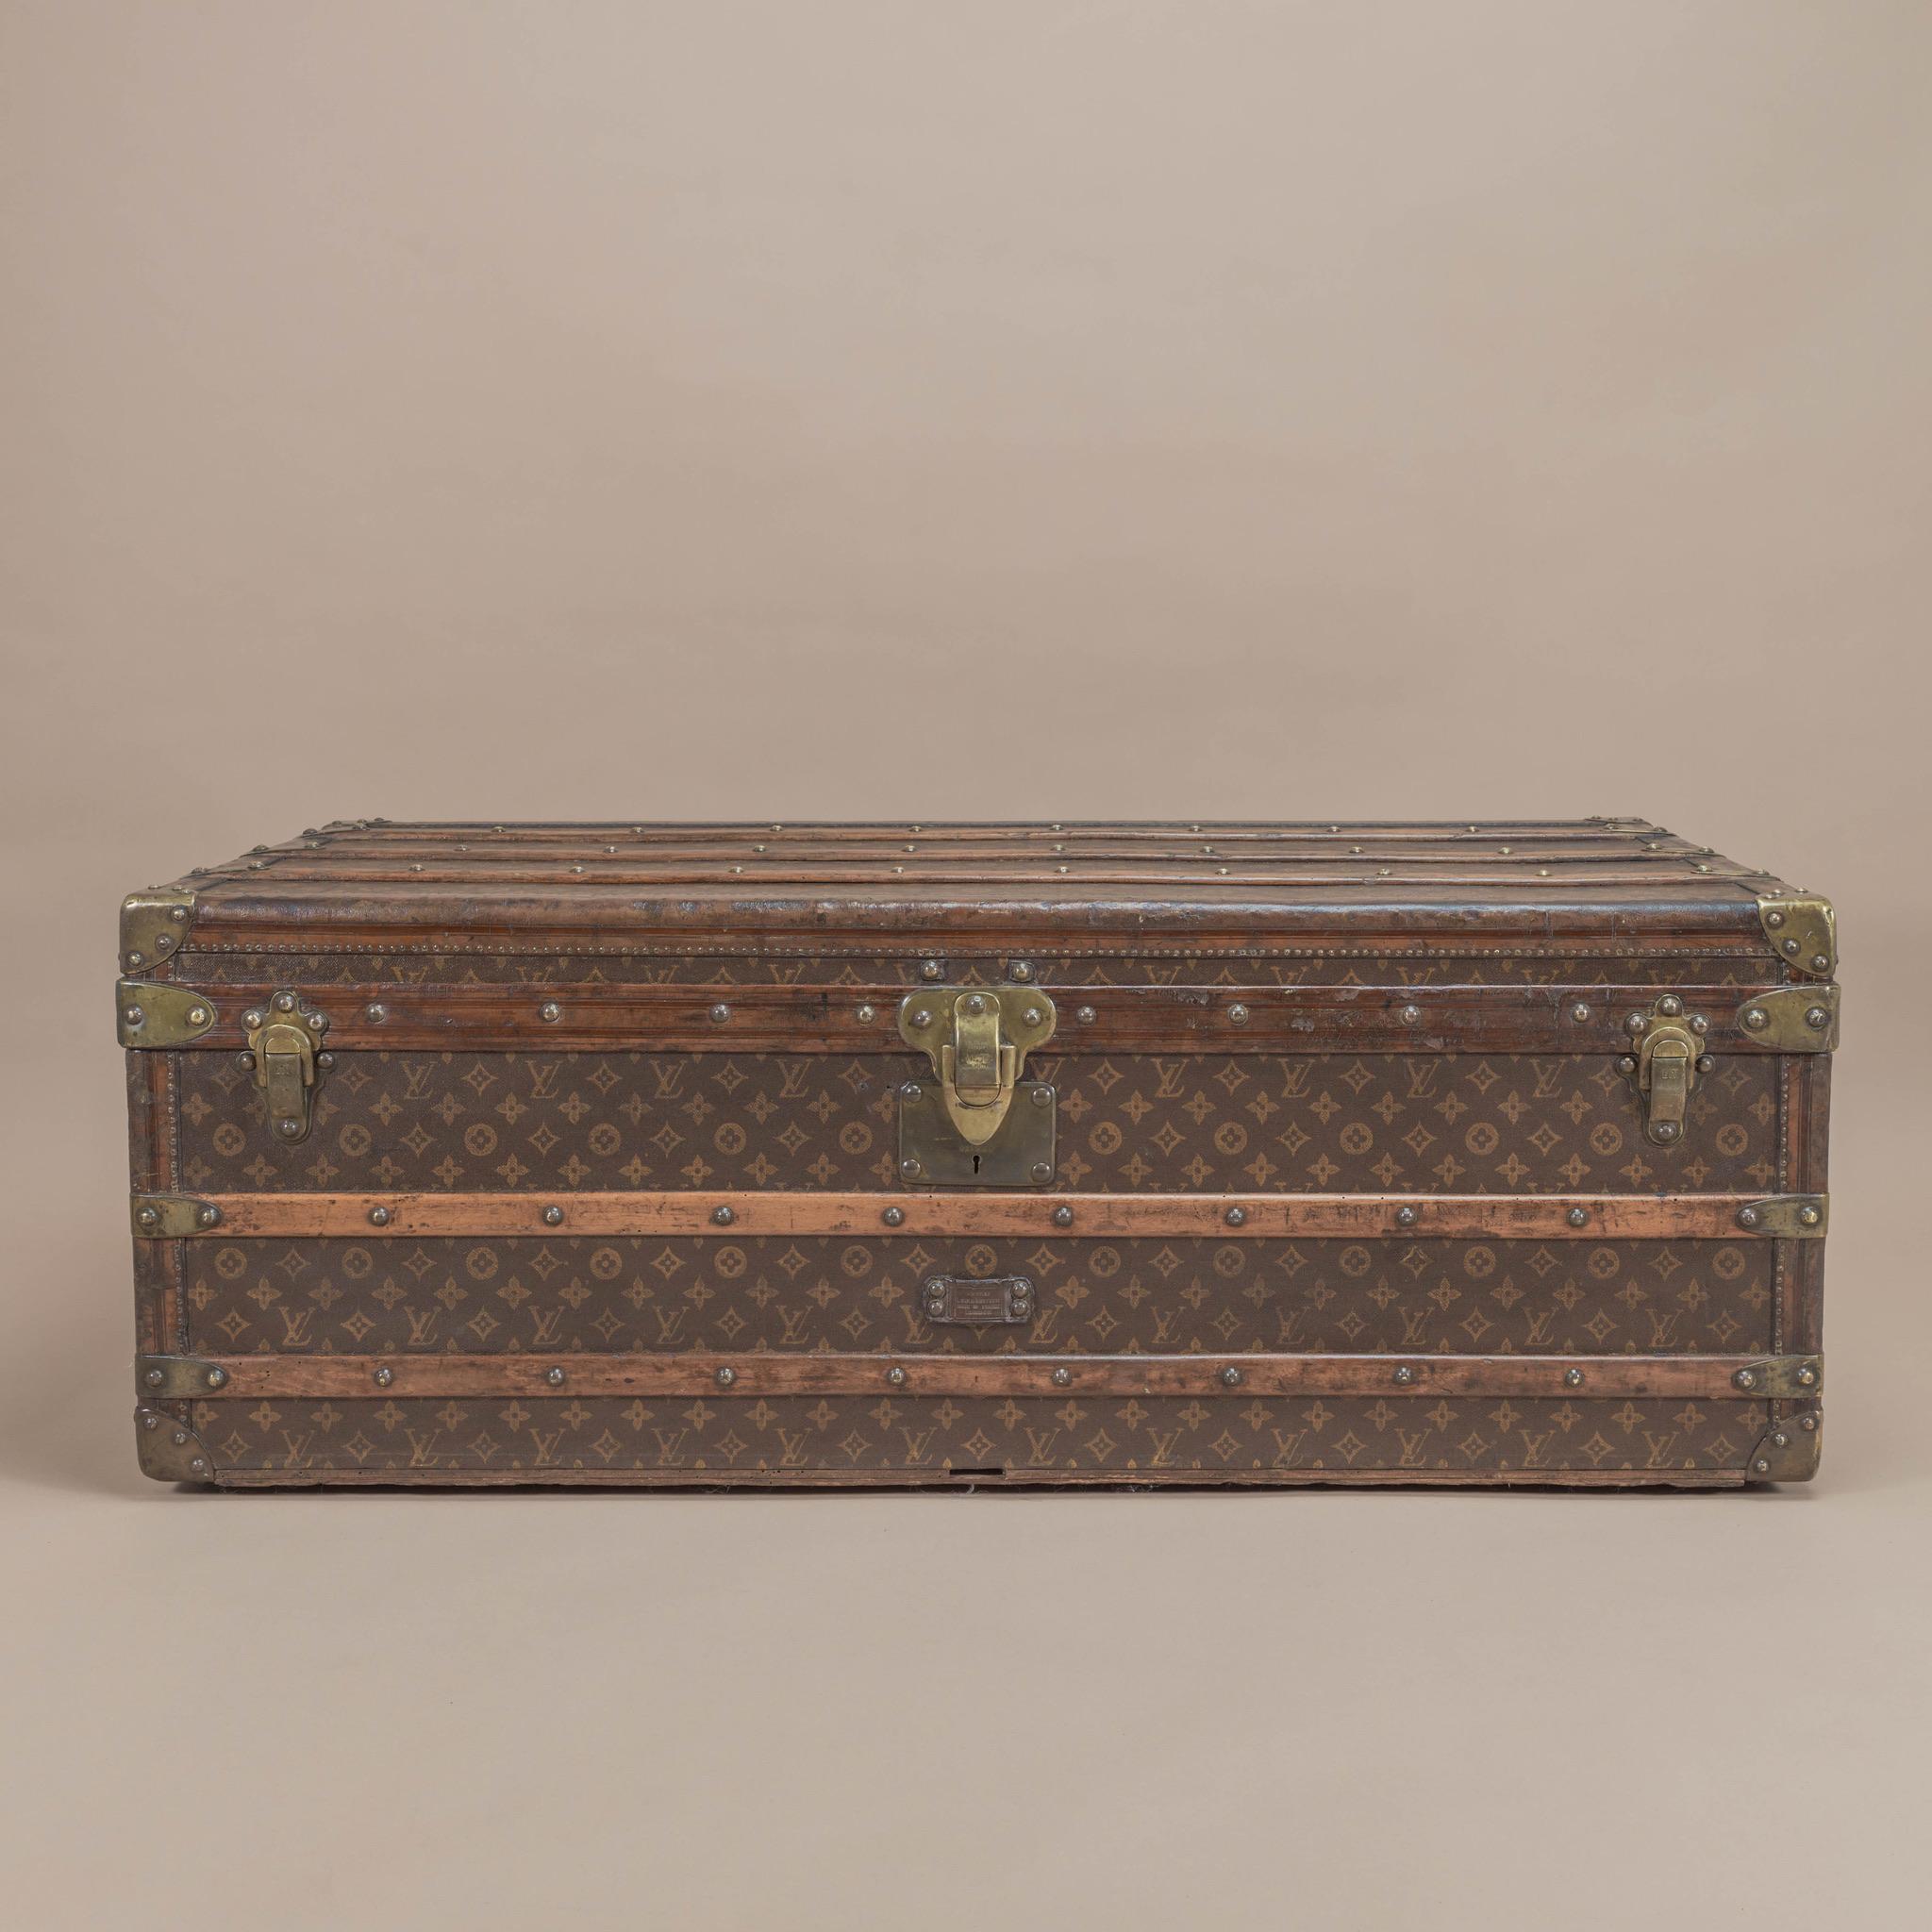 A wonderful brass bound Louis Vuitton LV monogram cabin trunk that is taller than usual and would be perfect as a coffee table. Comes complete with its original interior and tray. The brass fittings are nicely patinated and it has original leather